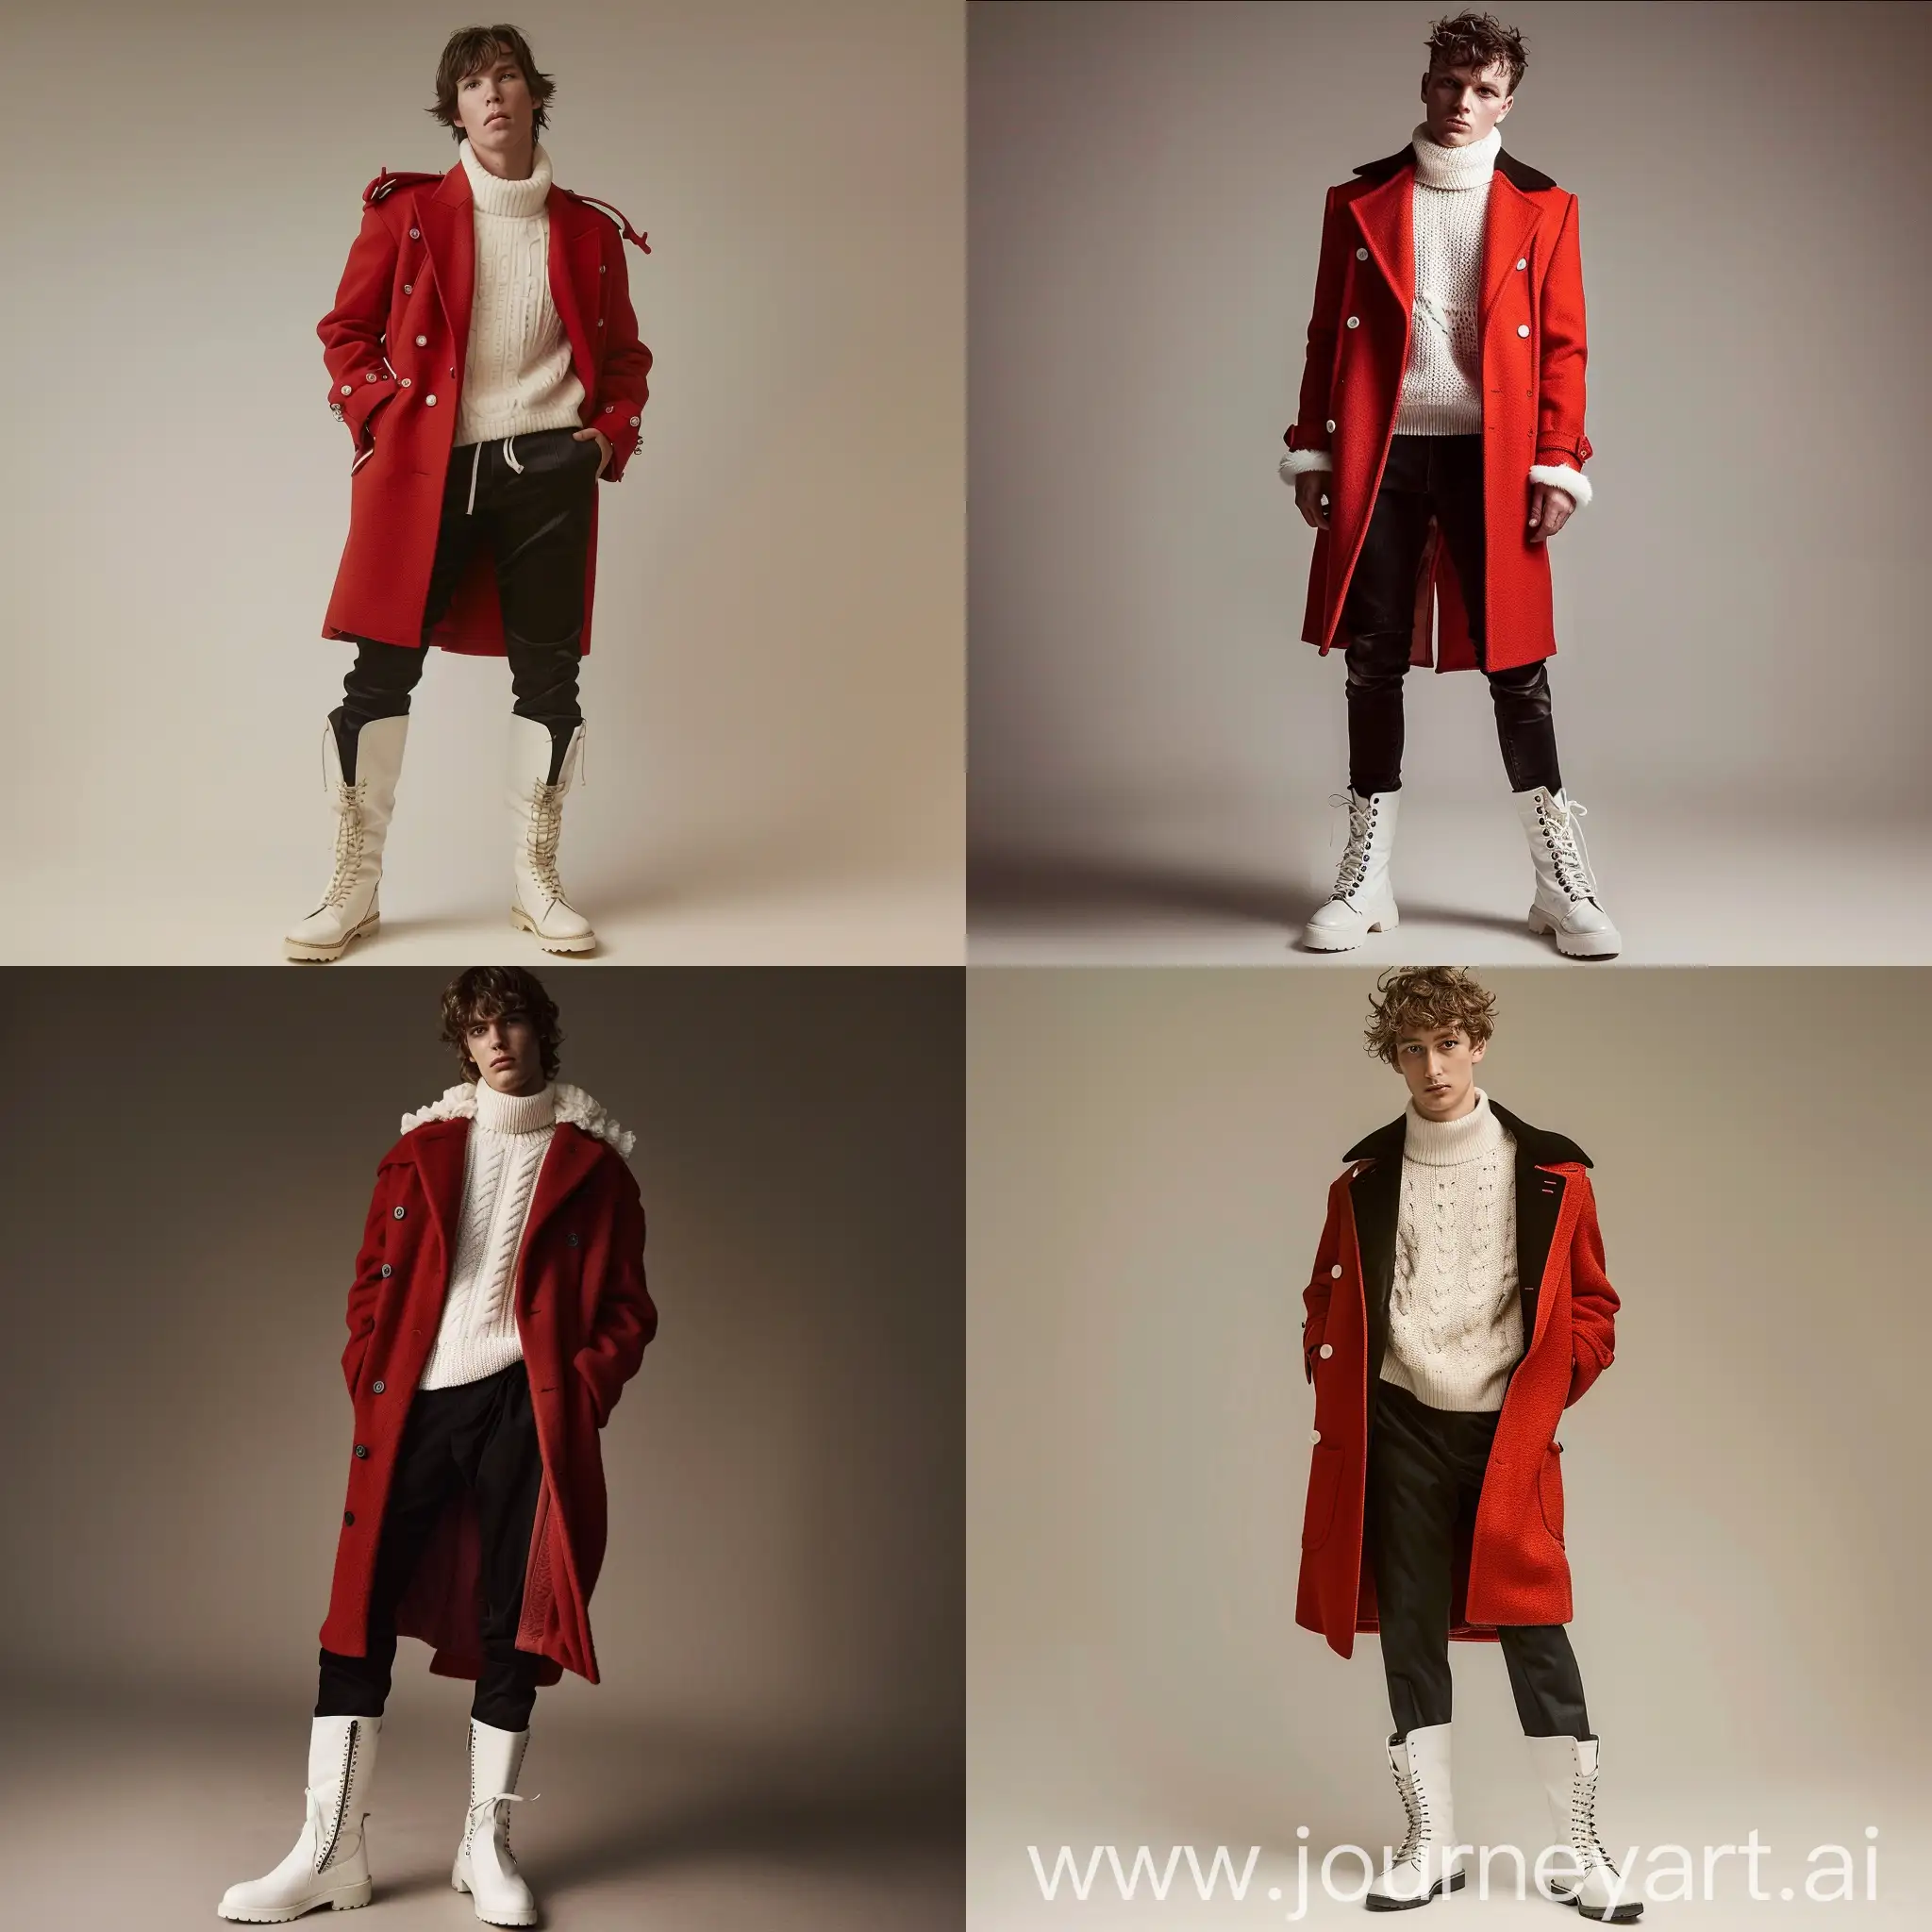 Fashionable-Young-Man-in-Red-Coat-and-White-Boots